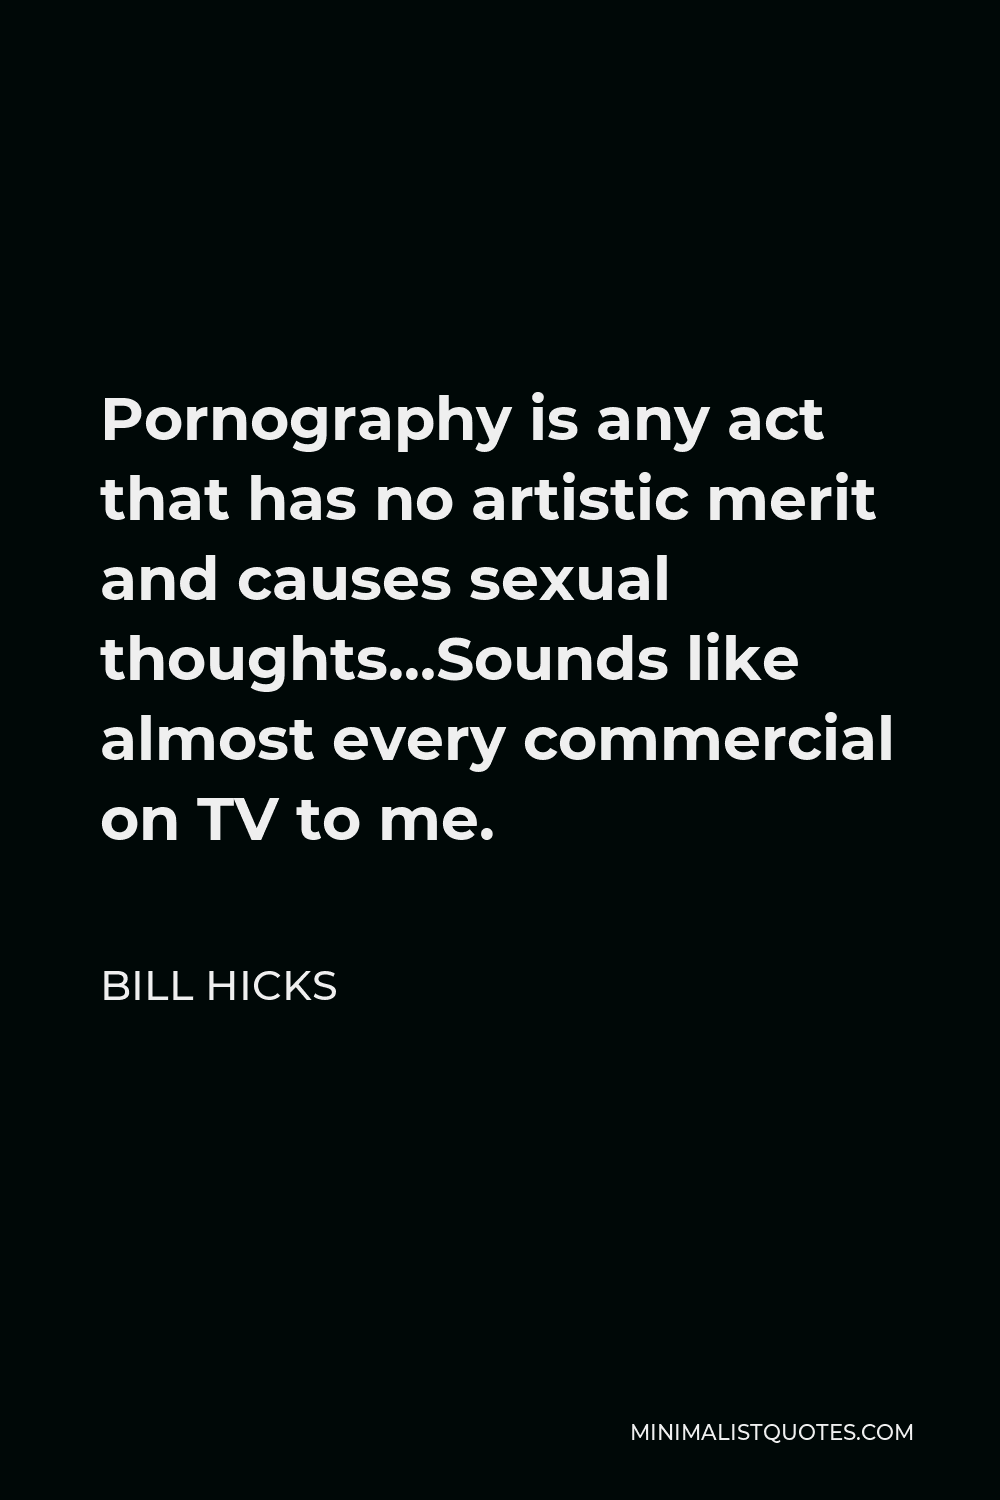 Bill Hicks Quote - Pornography is any act that has no artistic merit and causes sexual thoughts…Sounds like almost every commercial on TV to me.